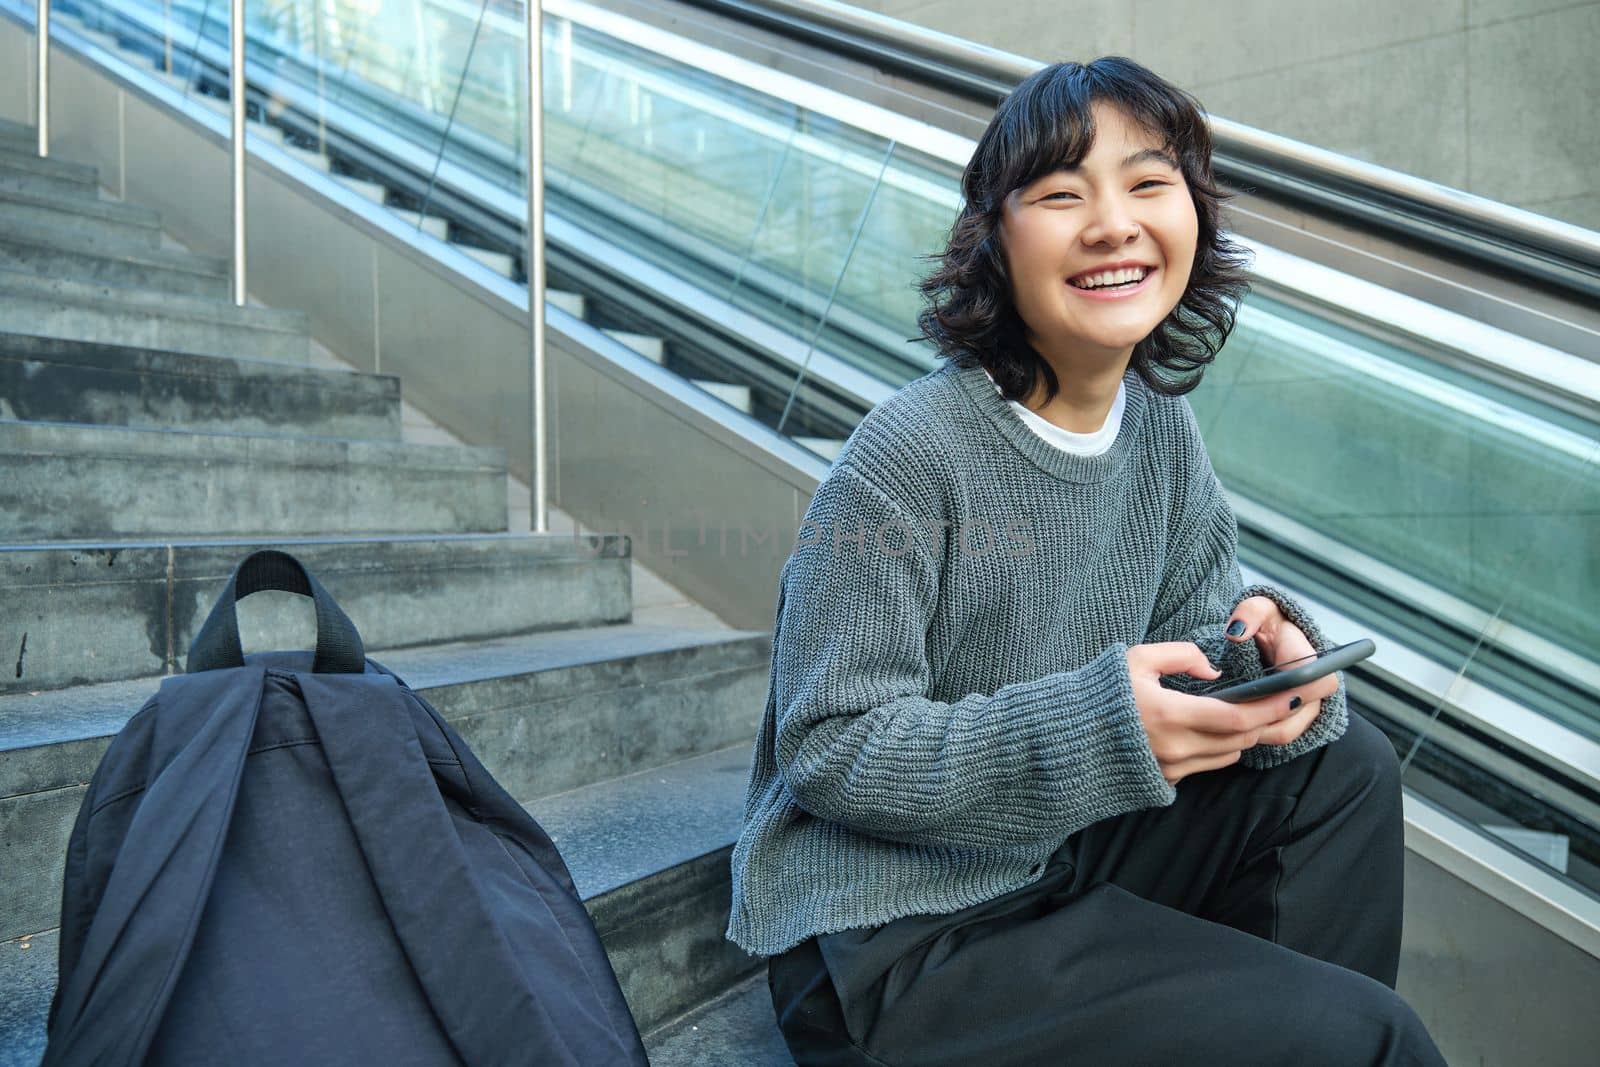 Stylish young girl student, sits on stairs with smartphone and backpack, laughs and smiles, texts message, uses social media.